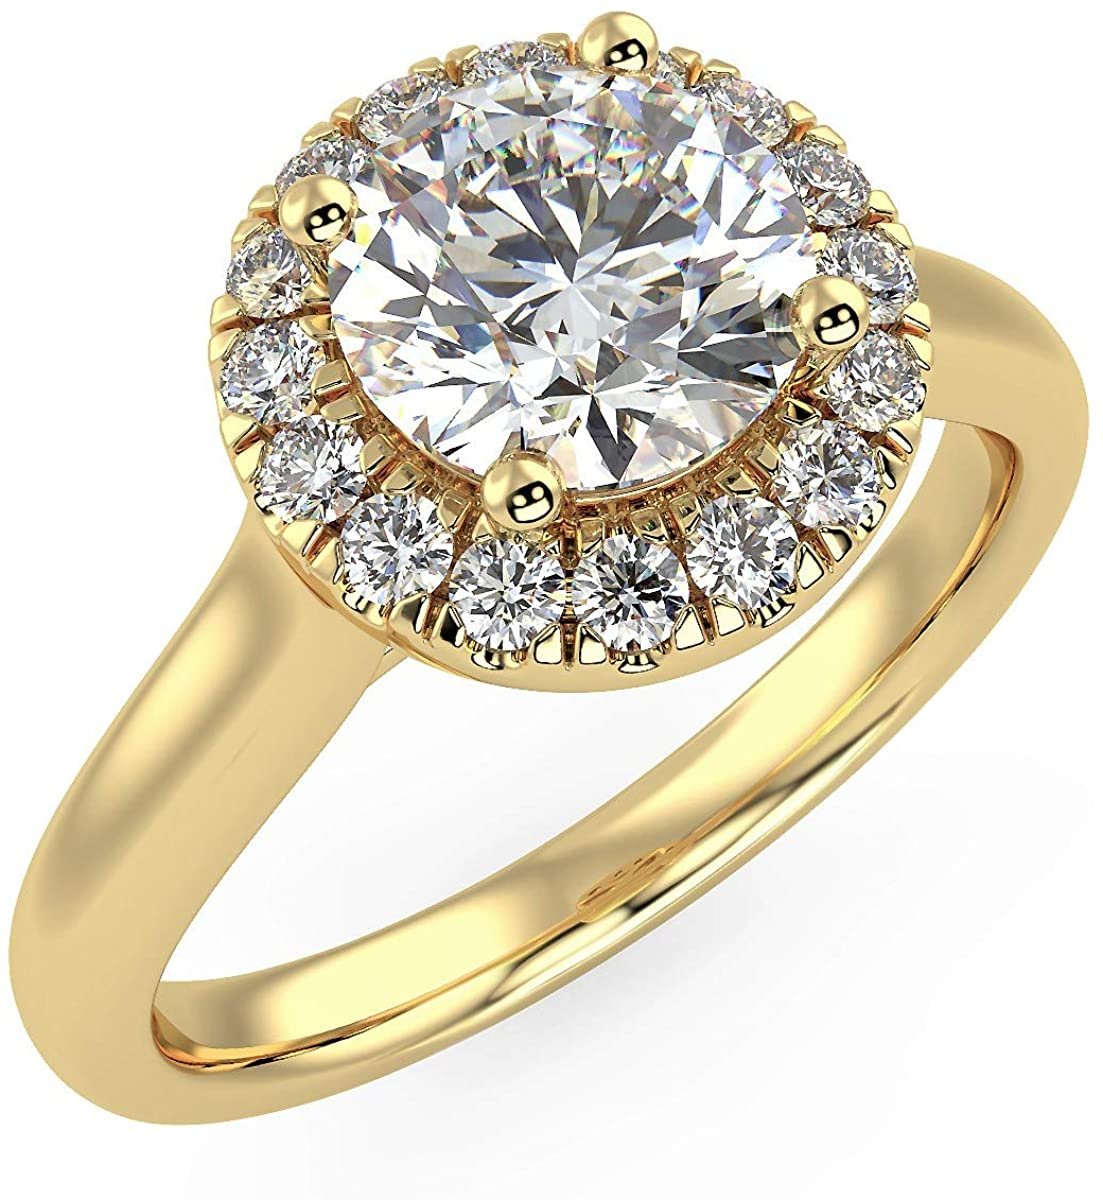 IGI Certified 14K Yellow Gold 1.0 Cttw Brilliant-Cut Lab Created Diamond Round Halo Engagement Ring (Center Stone: G-H Color, VS1-VS2 Clarity) - Size 8